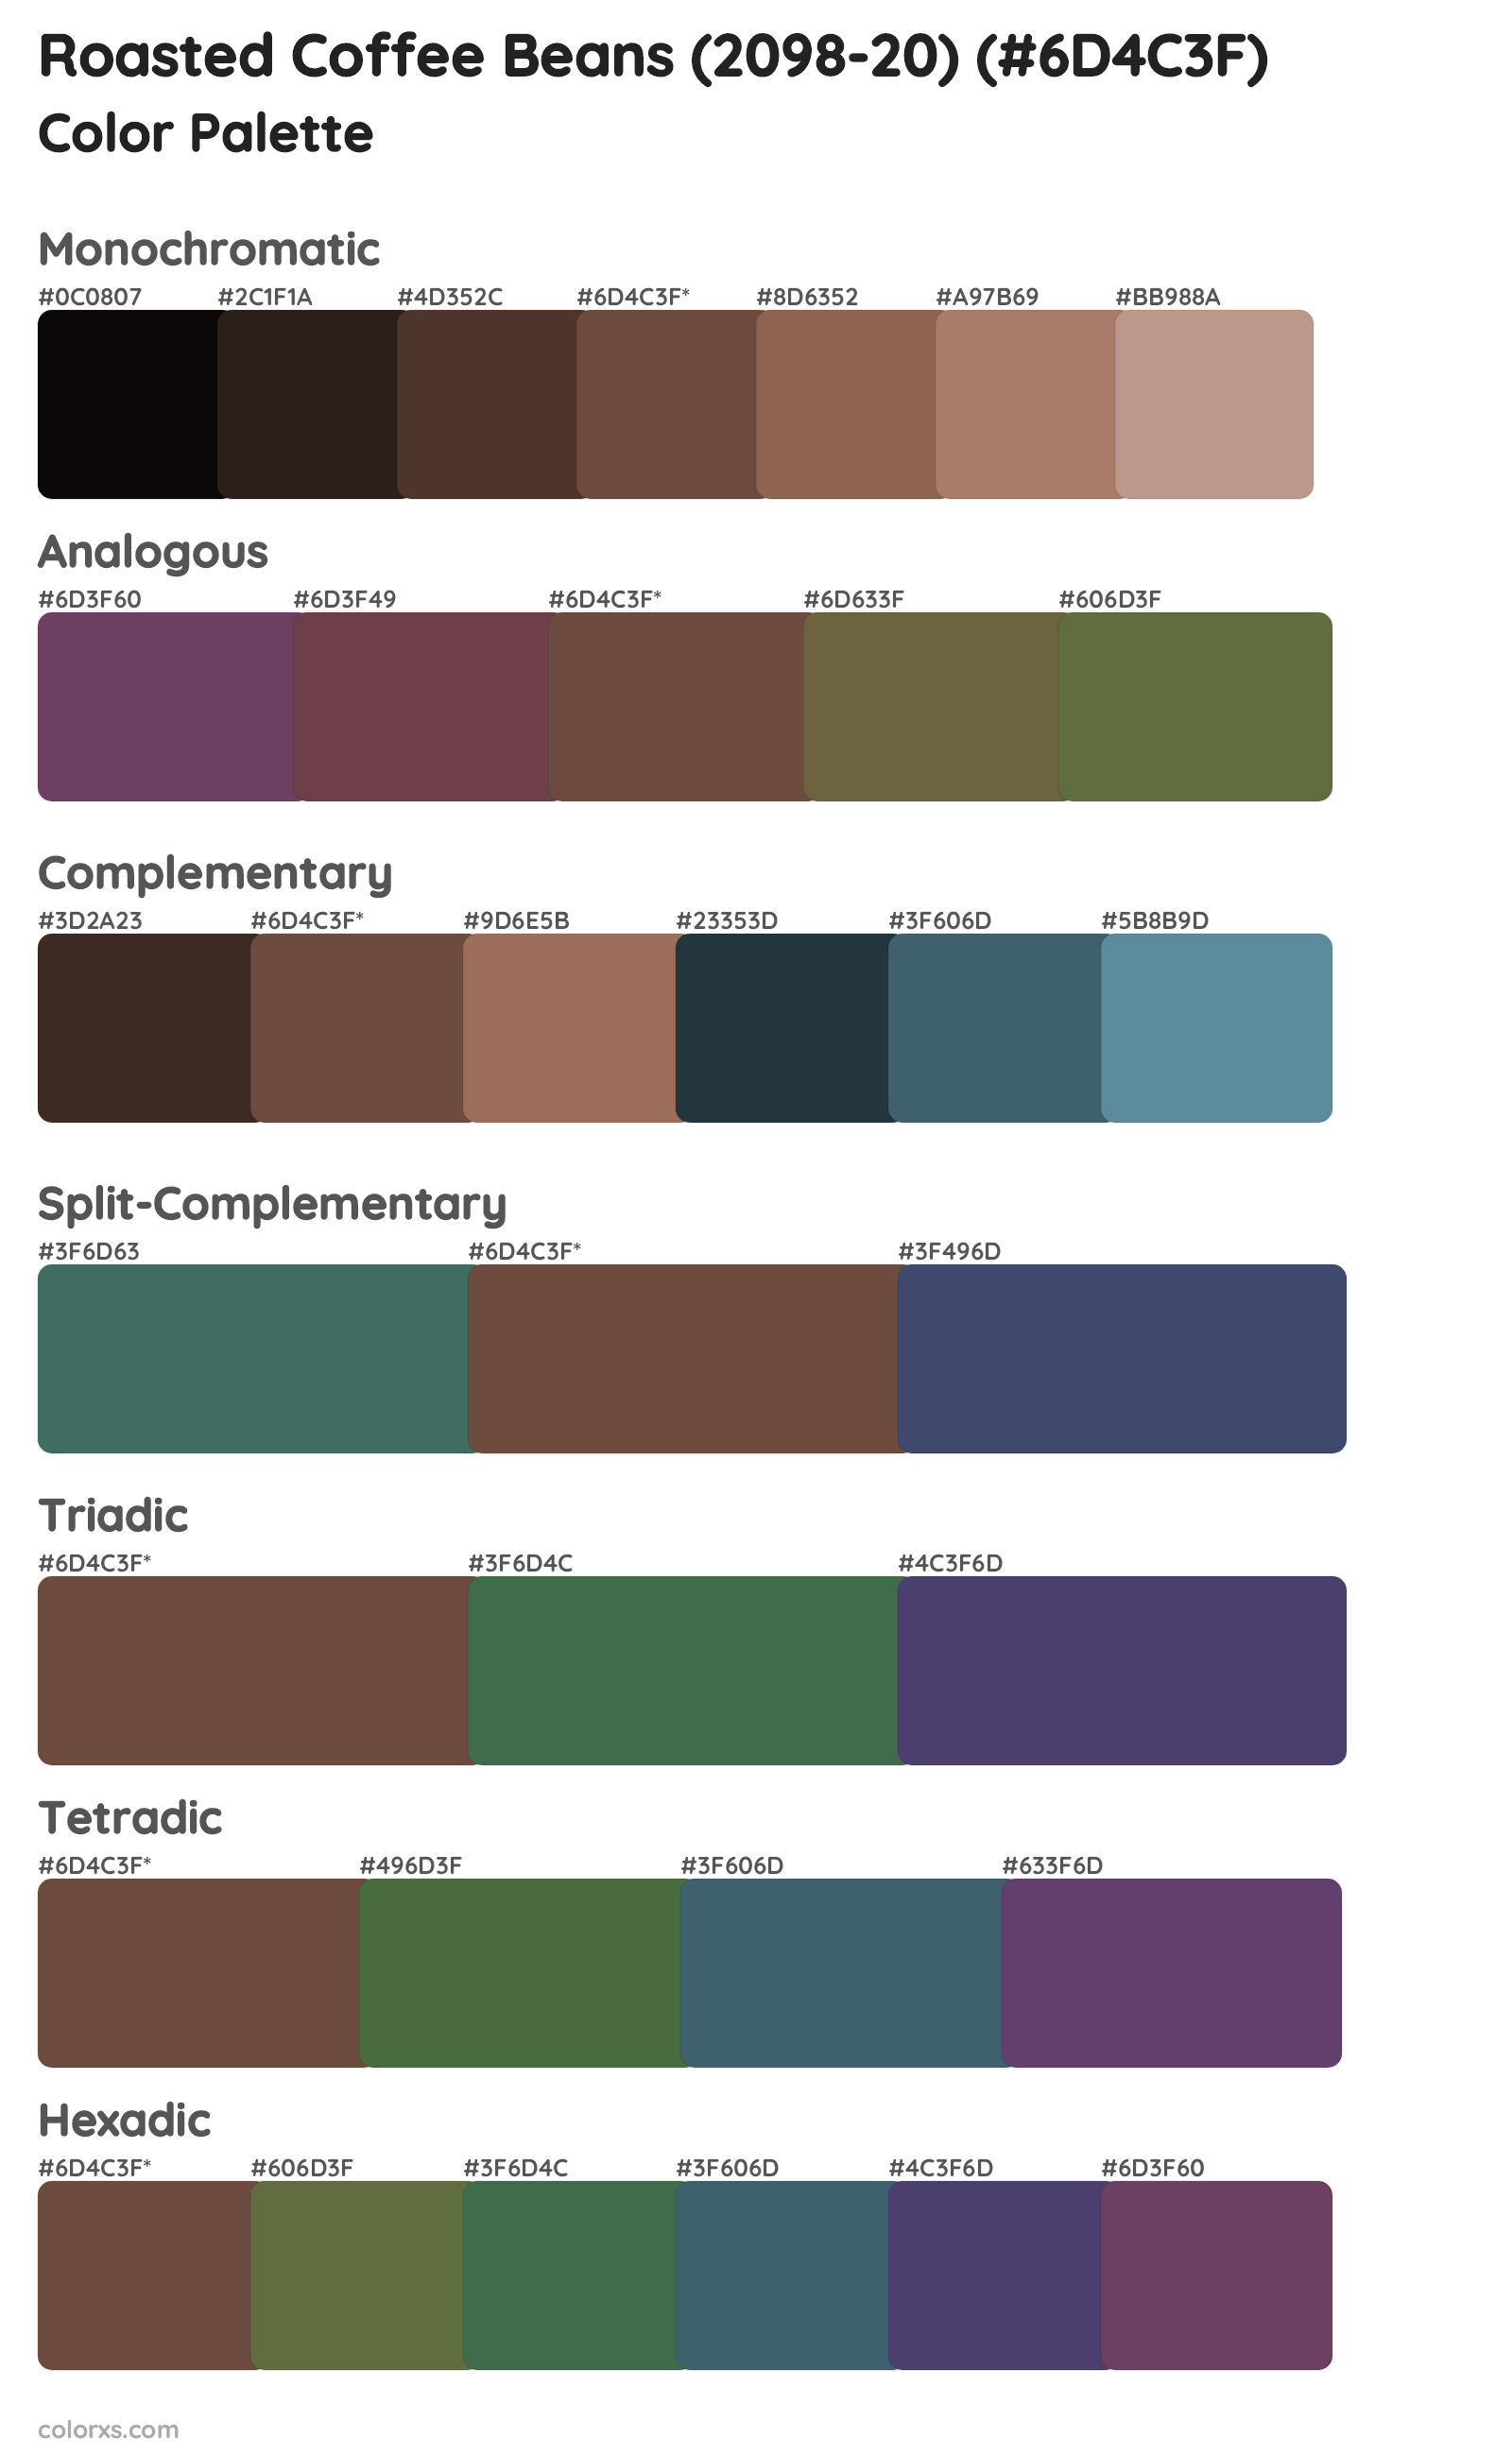 Roasted Coffee Beans (2098-20) Color Scheme Palettes